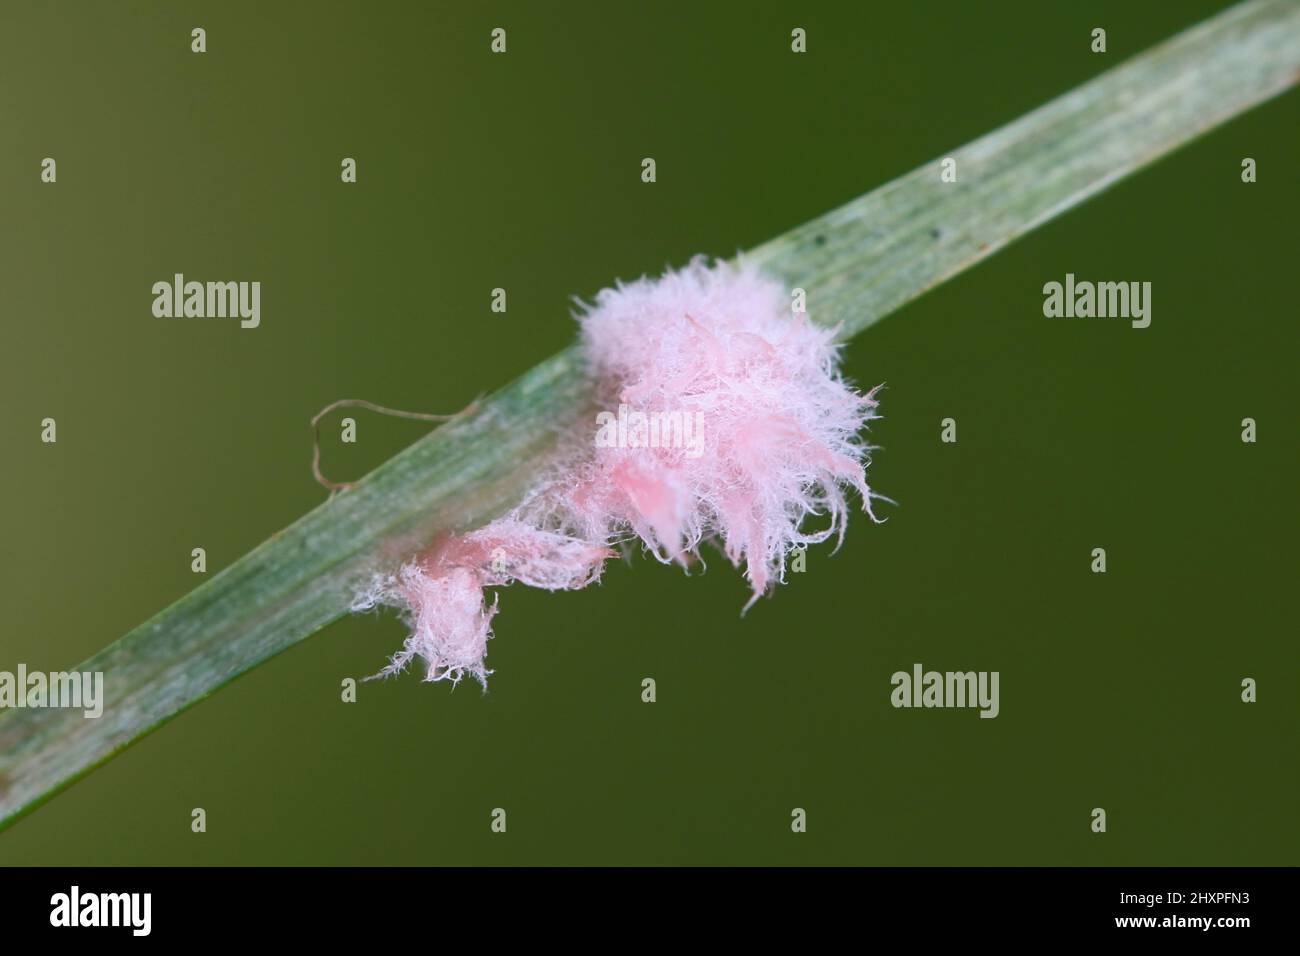 Laetisaria fuciformis, known as Red thread disease, a plant pathogen infecting lawns, here in small, pink, cotton wool-like mycelium stage Stock Photo